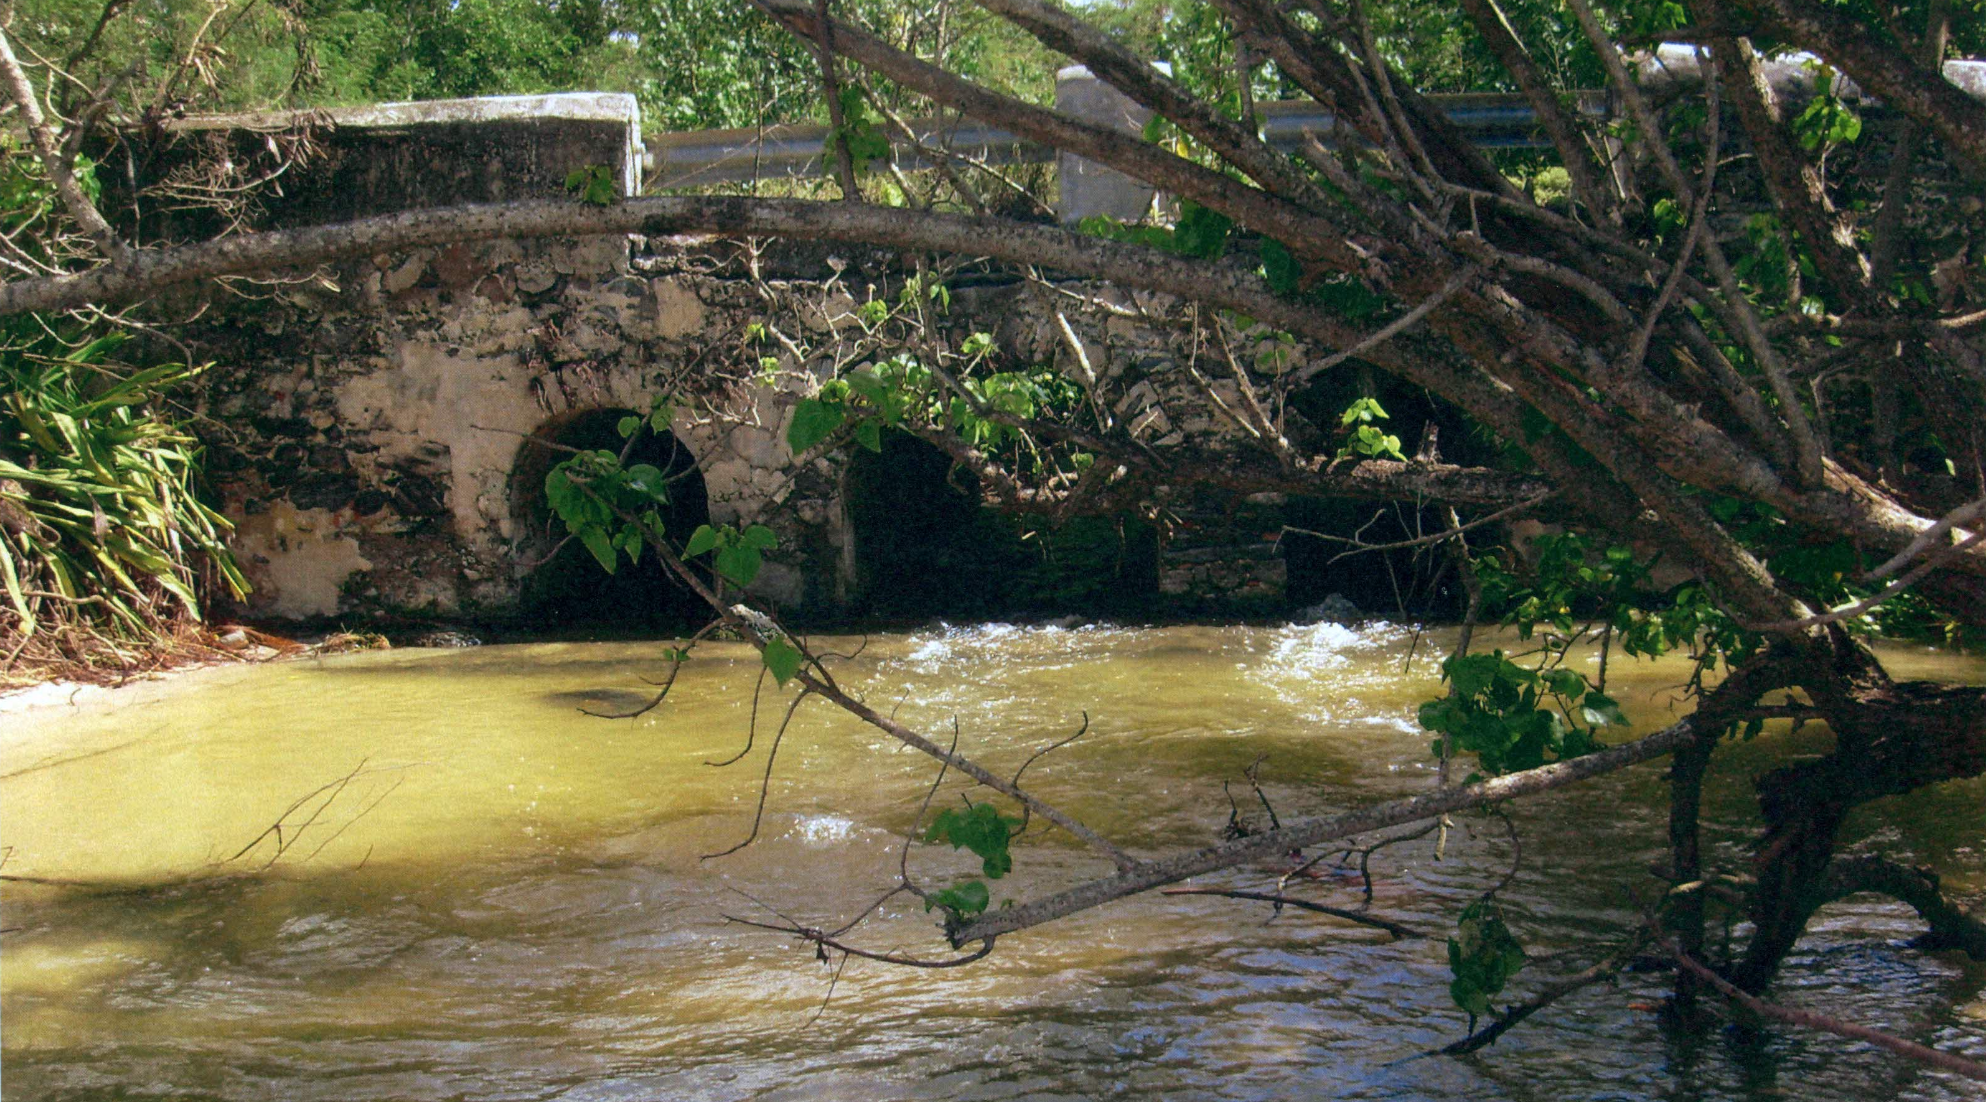 An old Danish bridge at Estate Williams along Emancipation Road on the northern coast of St. Croix. This flowing stream was during heavy rainfall that came from the highlands or mountainous area of the St. Croix countryside. (Photo by Olasee Davis)